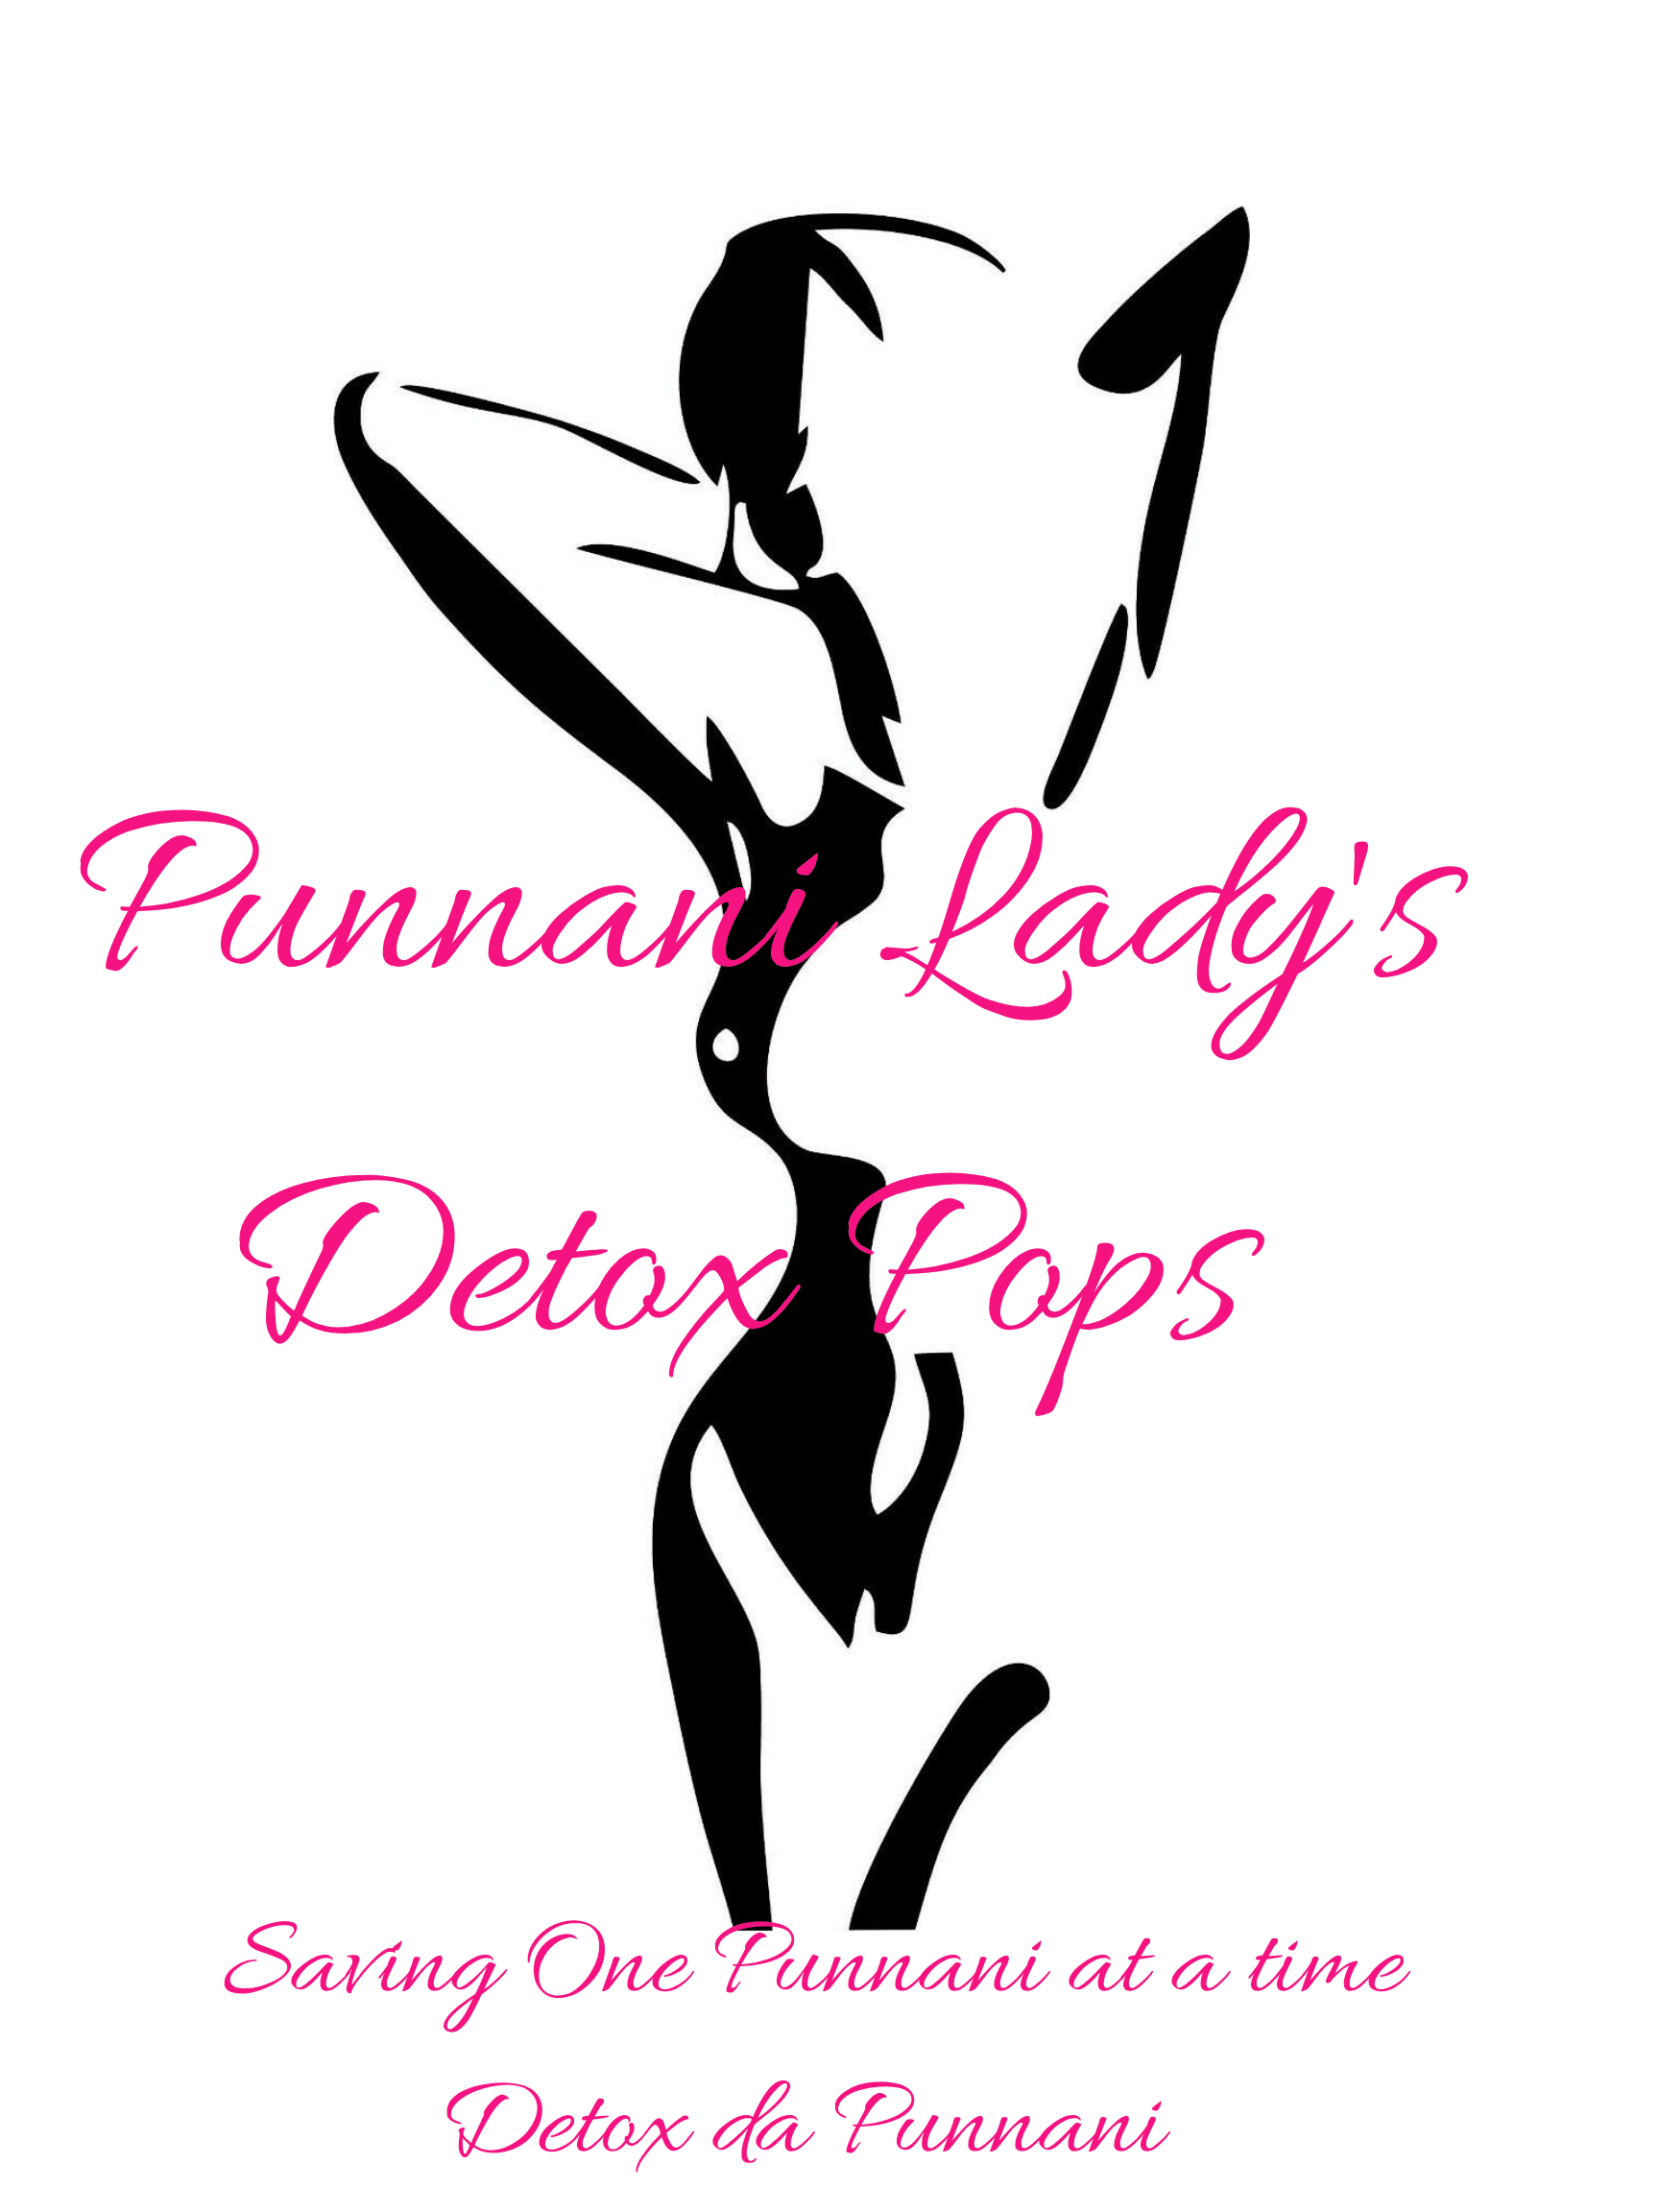 PUNNANI LADY'S DETOX POPS AND HERBAL SUPPLEMENTS